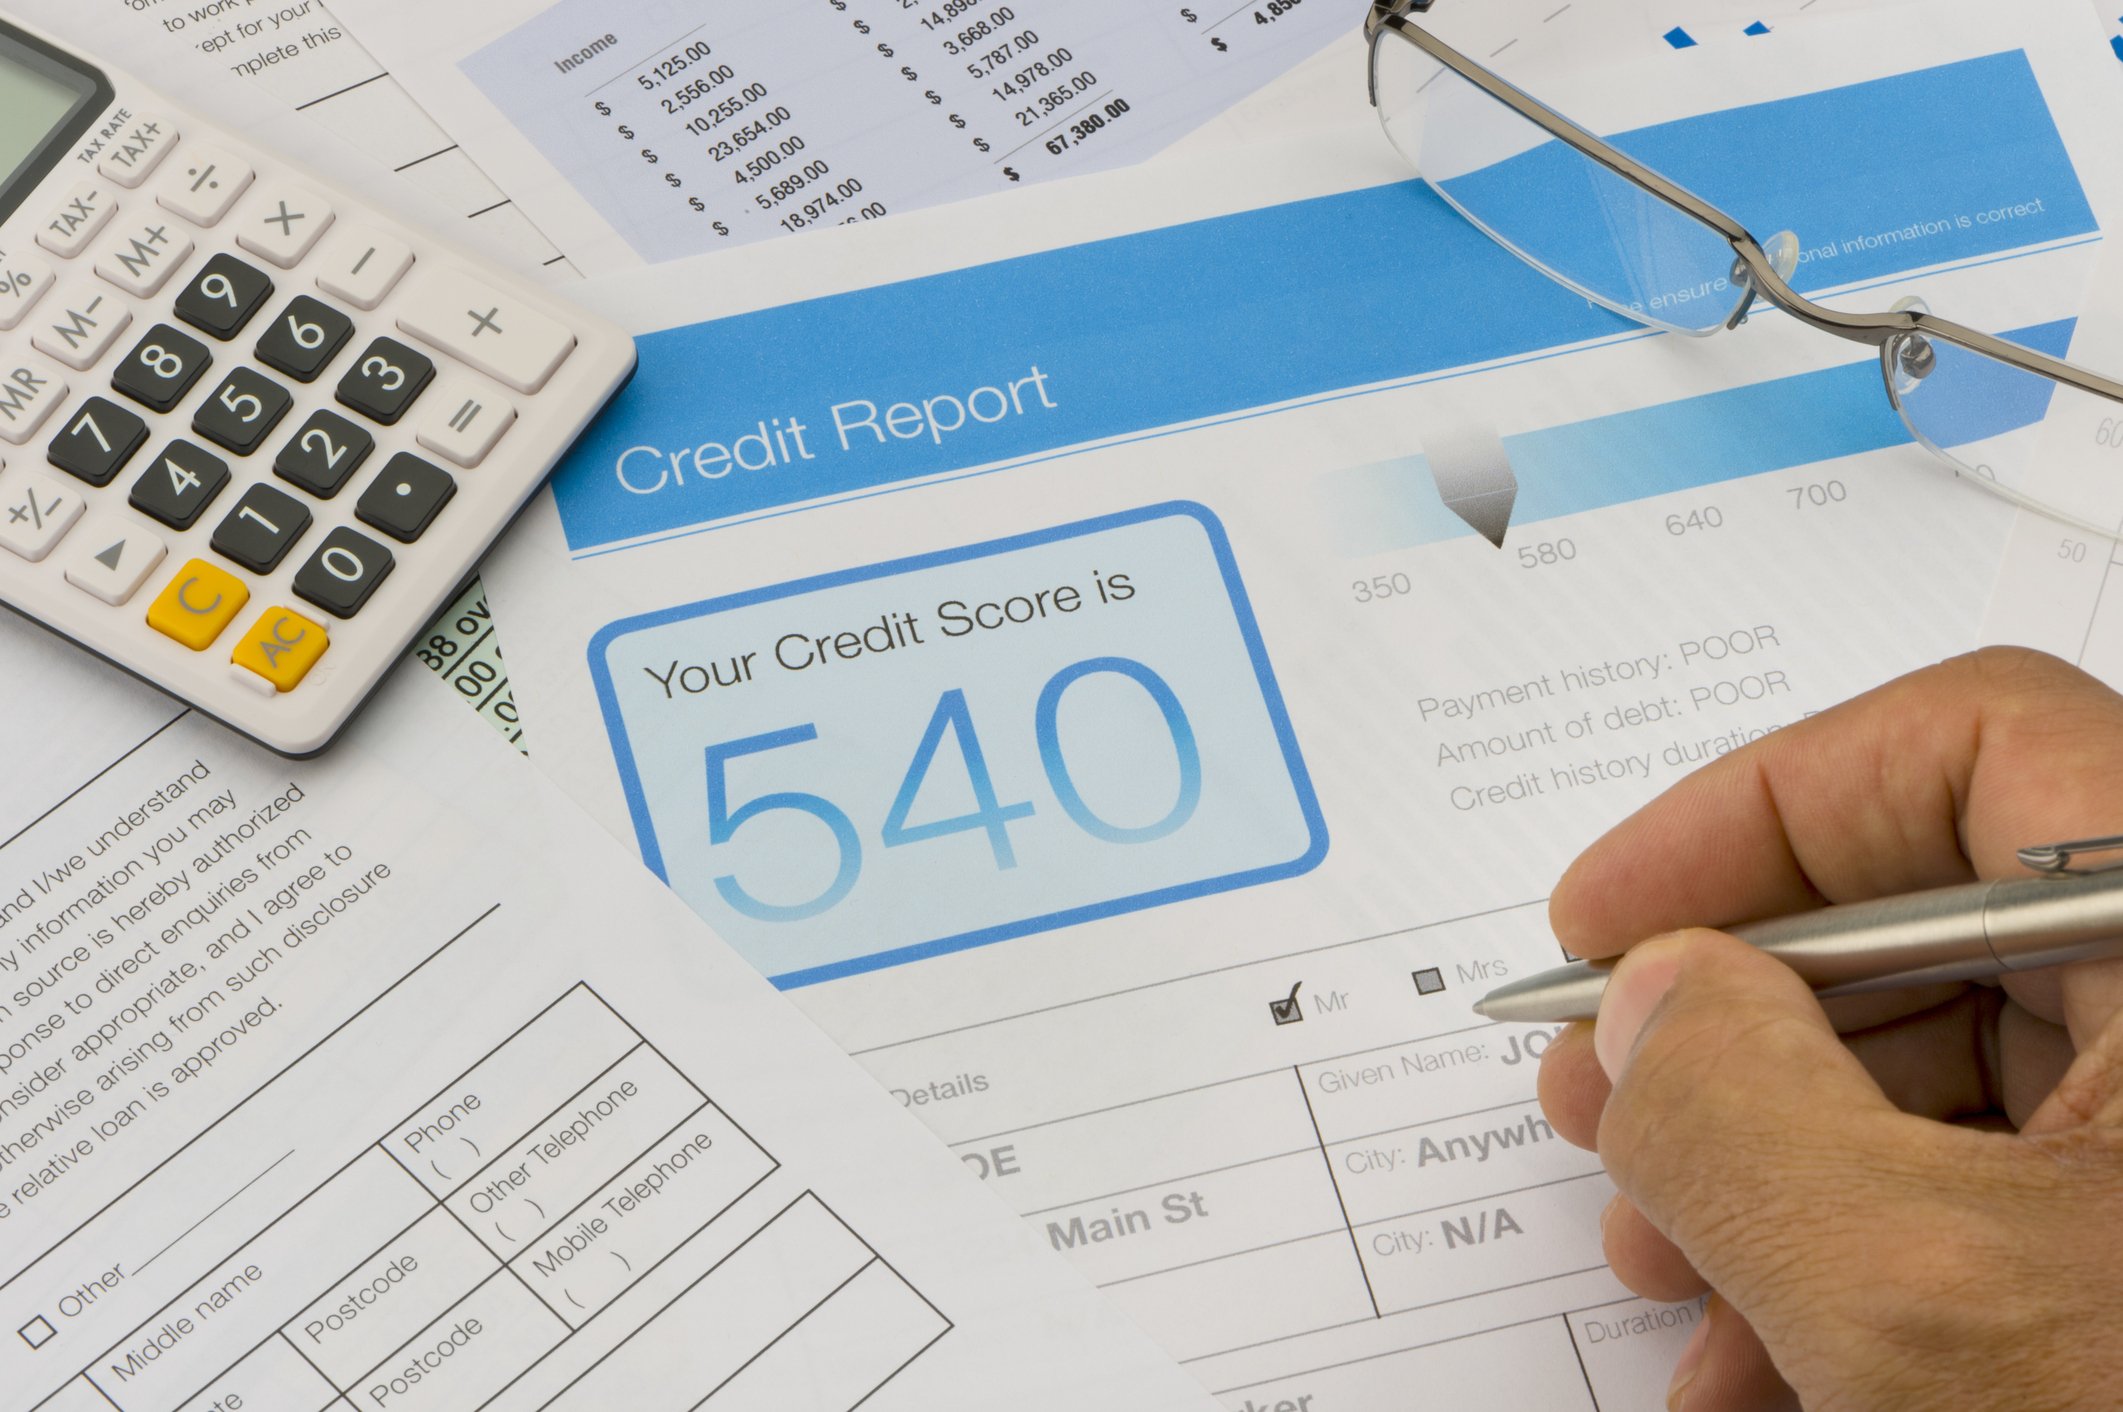 How long does it take to improve credit score?